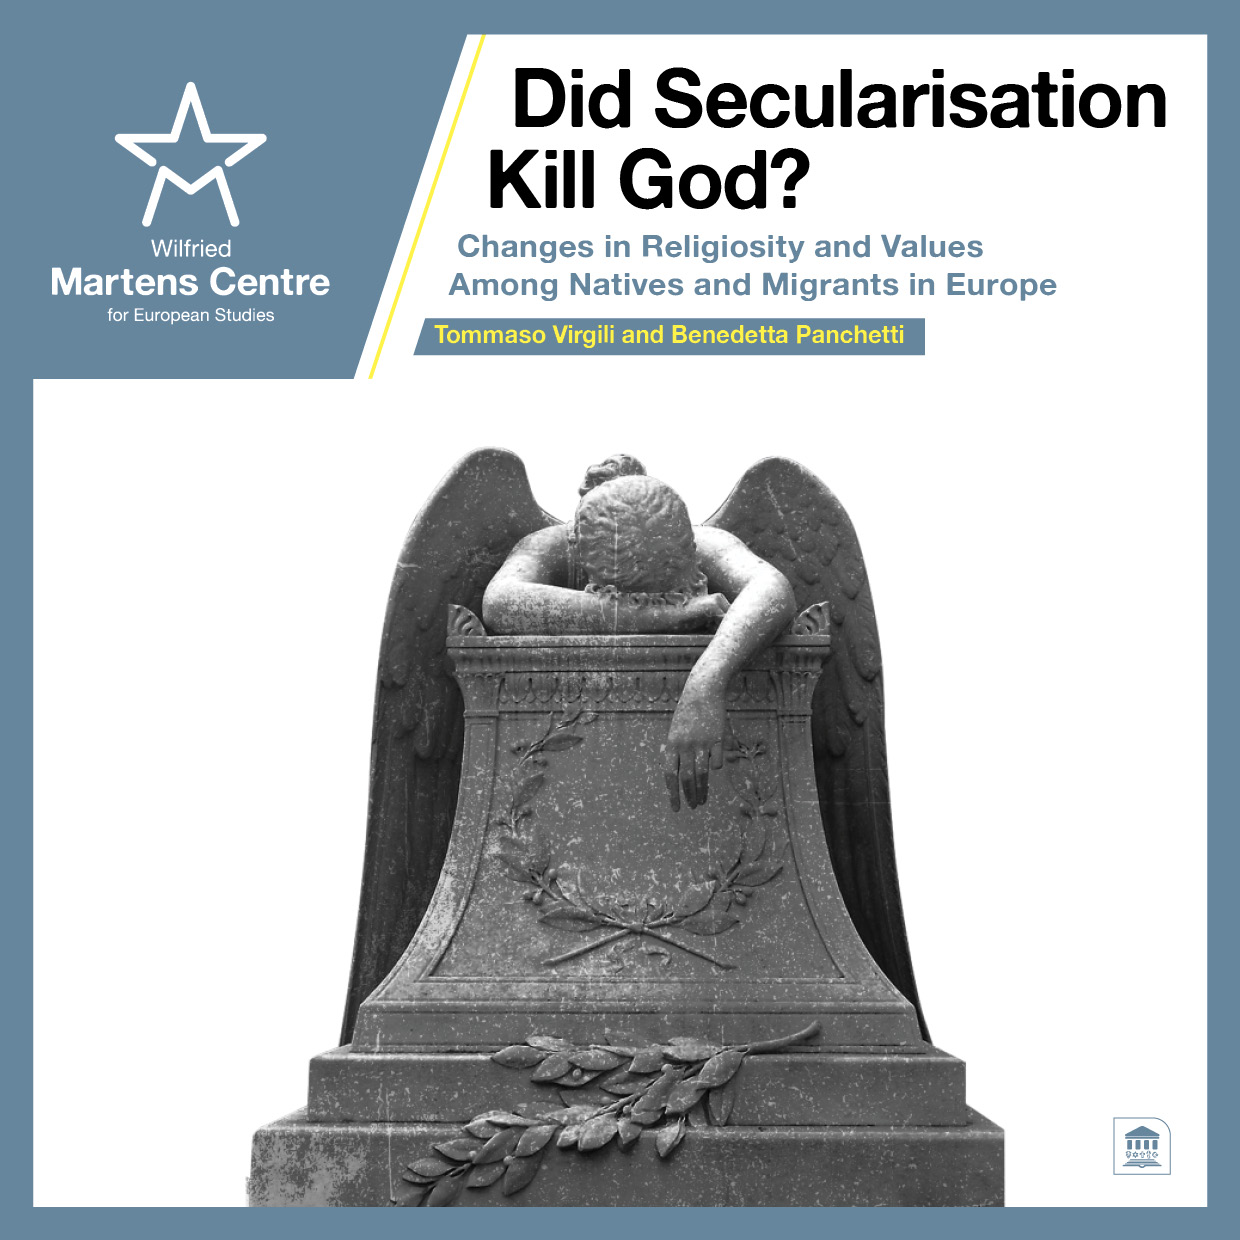 Did Secularisation Kill God? Changes in Religiosity and Values Among Natives and Migrants in Europe